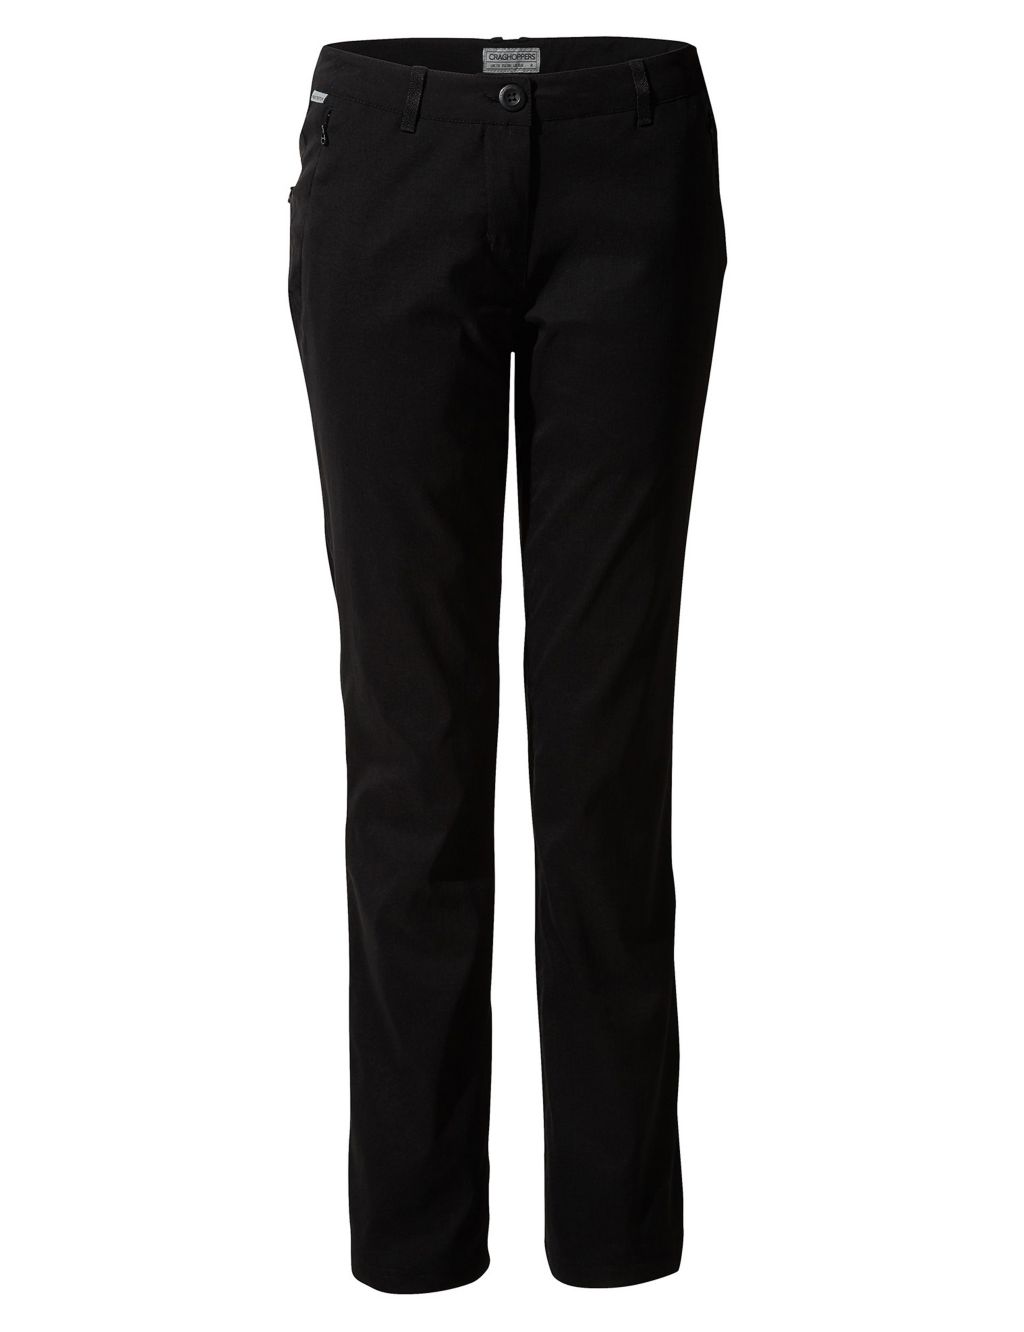 Kiwi Pro Lined Trousers 1 of 6